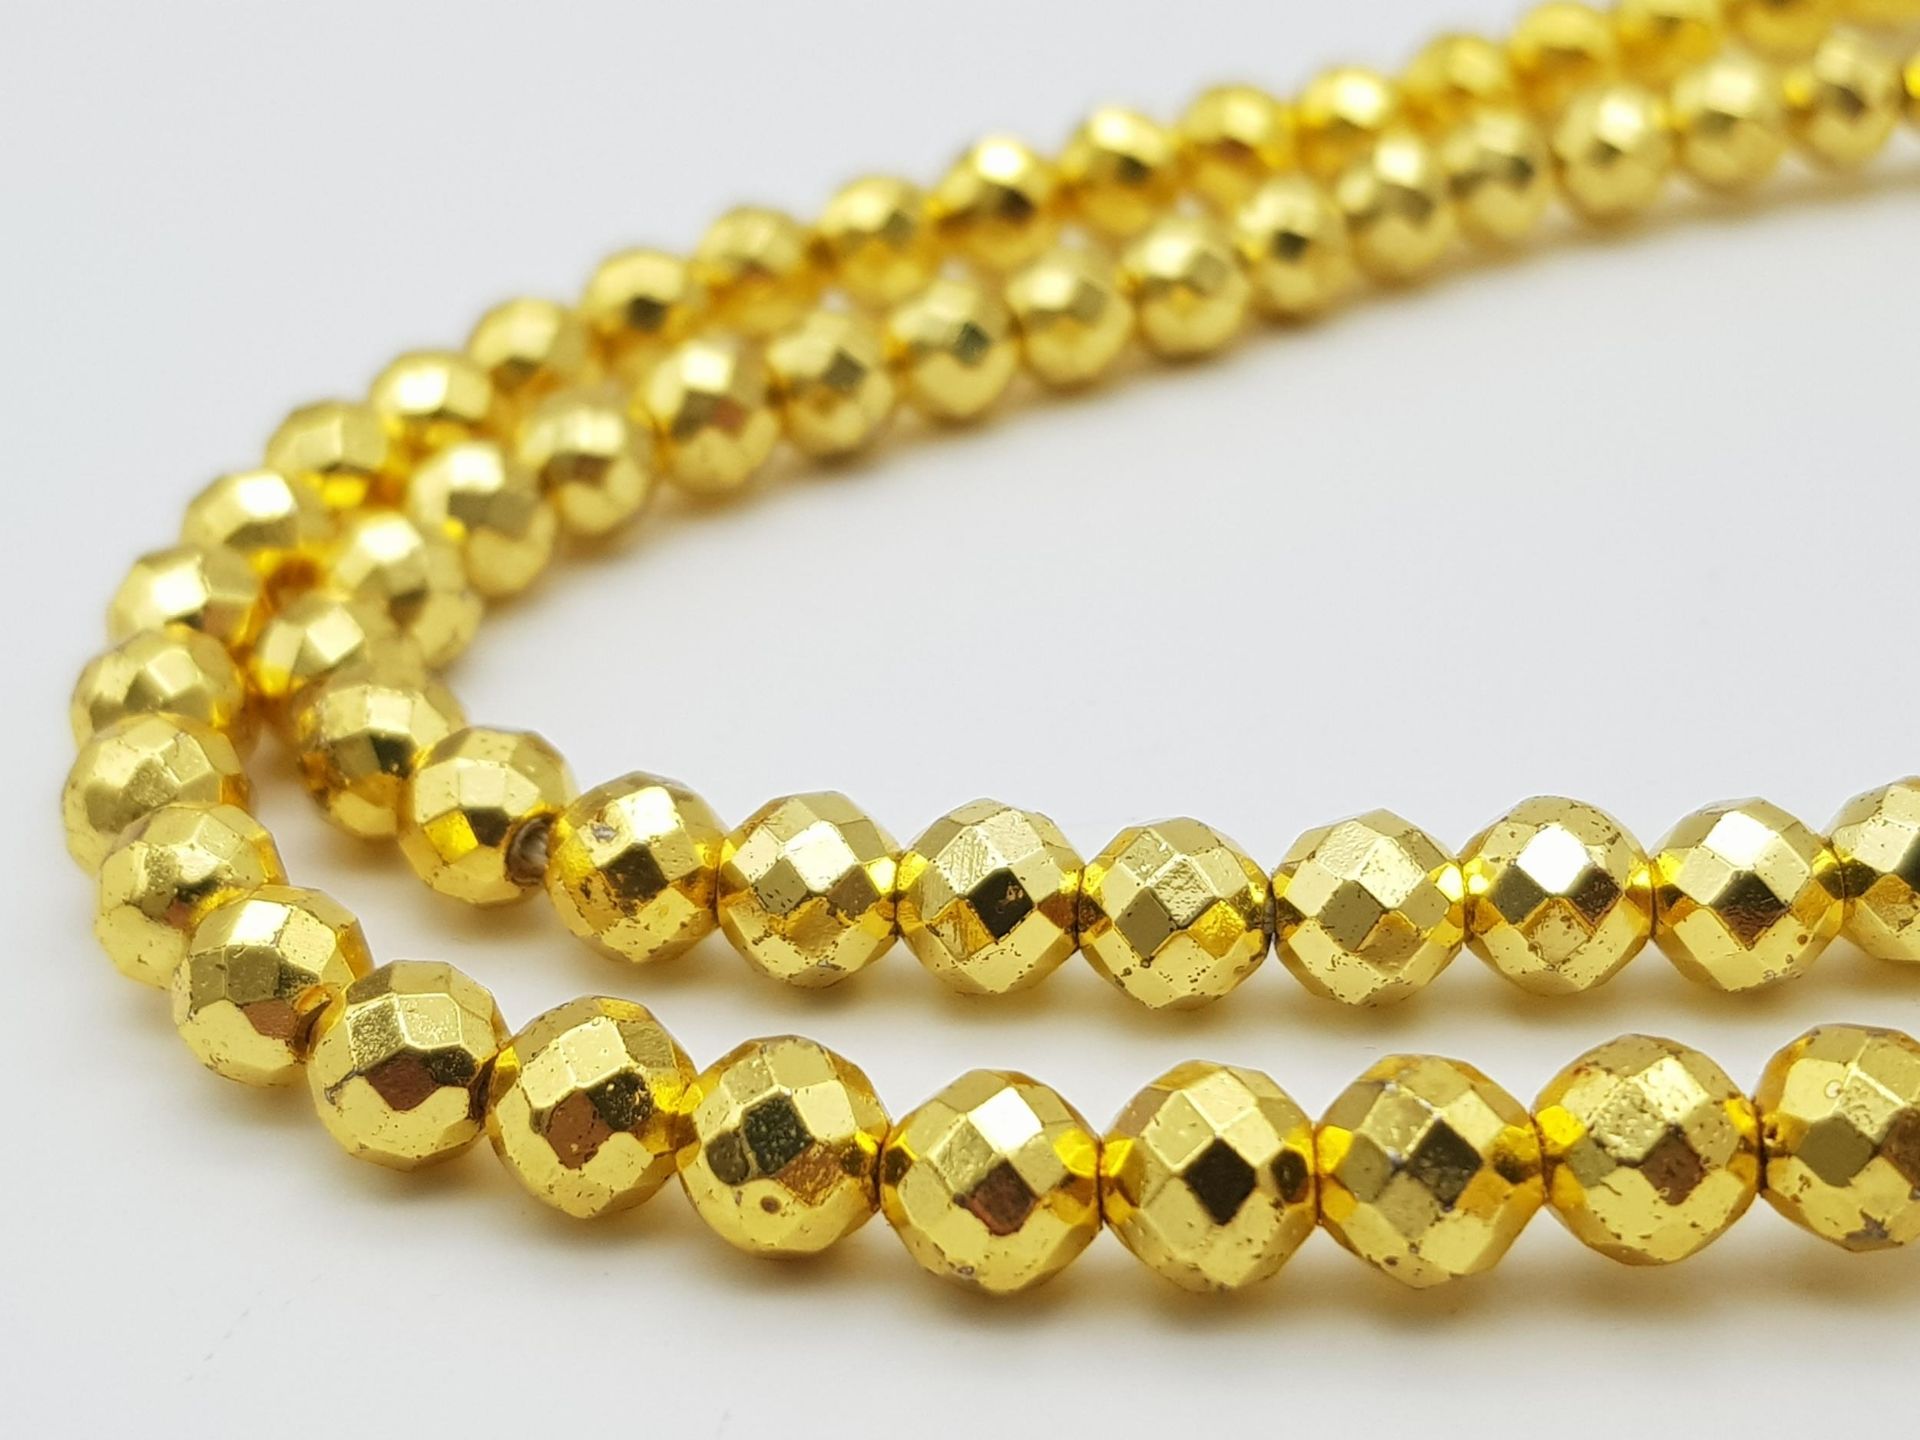 A Limited Edition (1 of 200), 679.65 Carat, Gold Haematite Bead Necklace. Fully Certified - Image 3 of 5